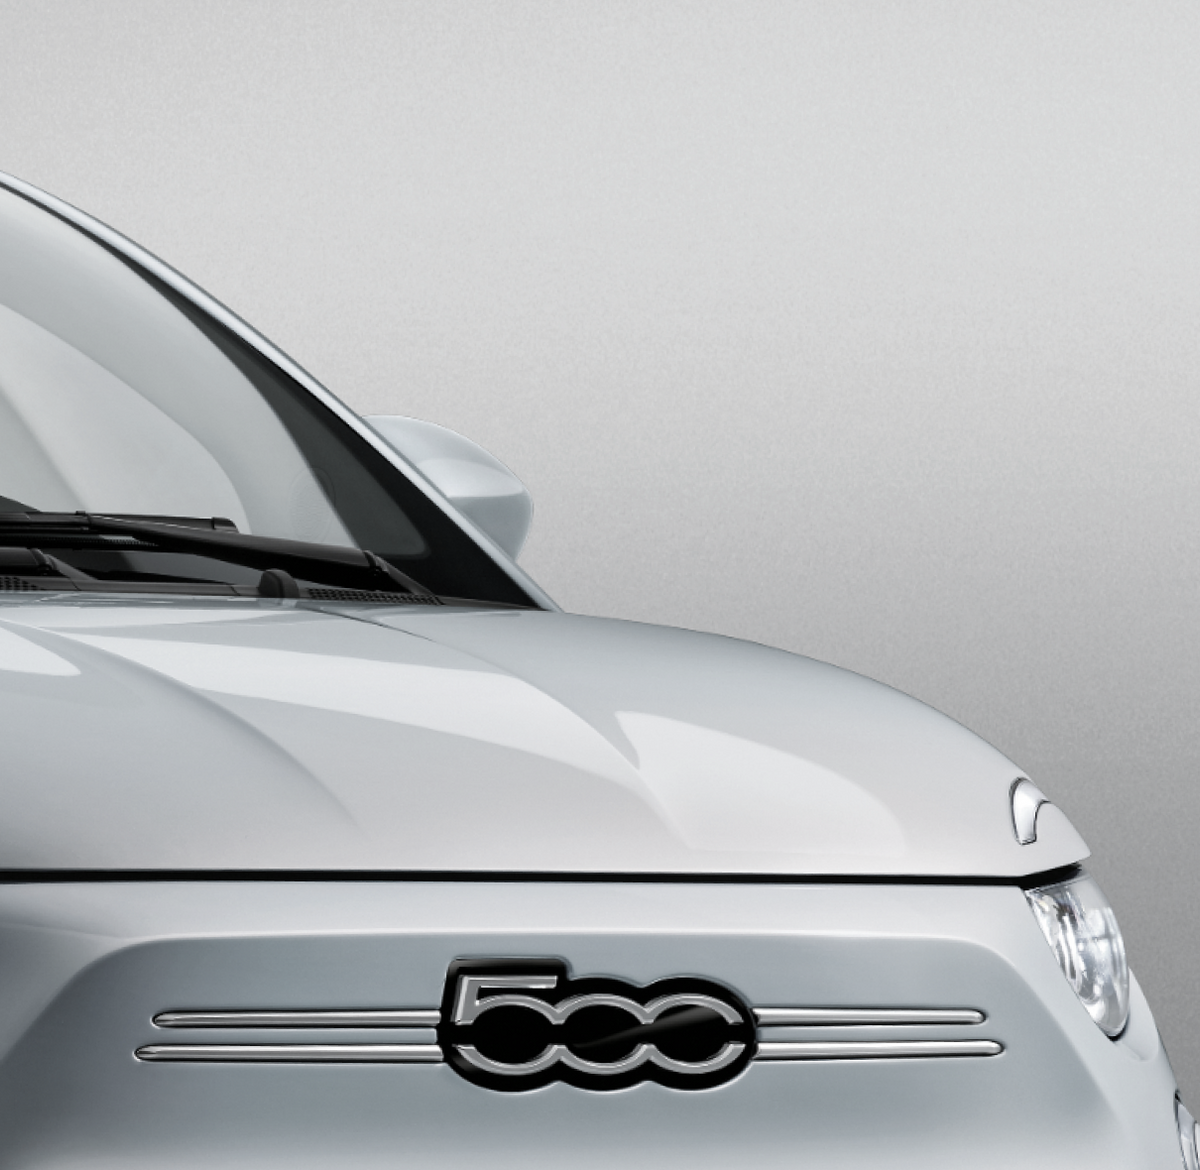 2012 Fiat 500 By Gucci Show & Tell 